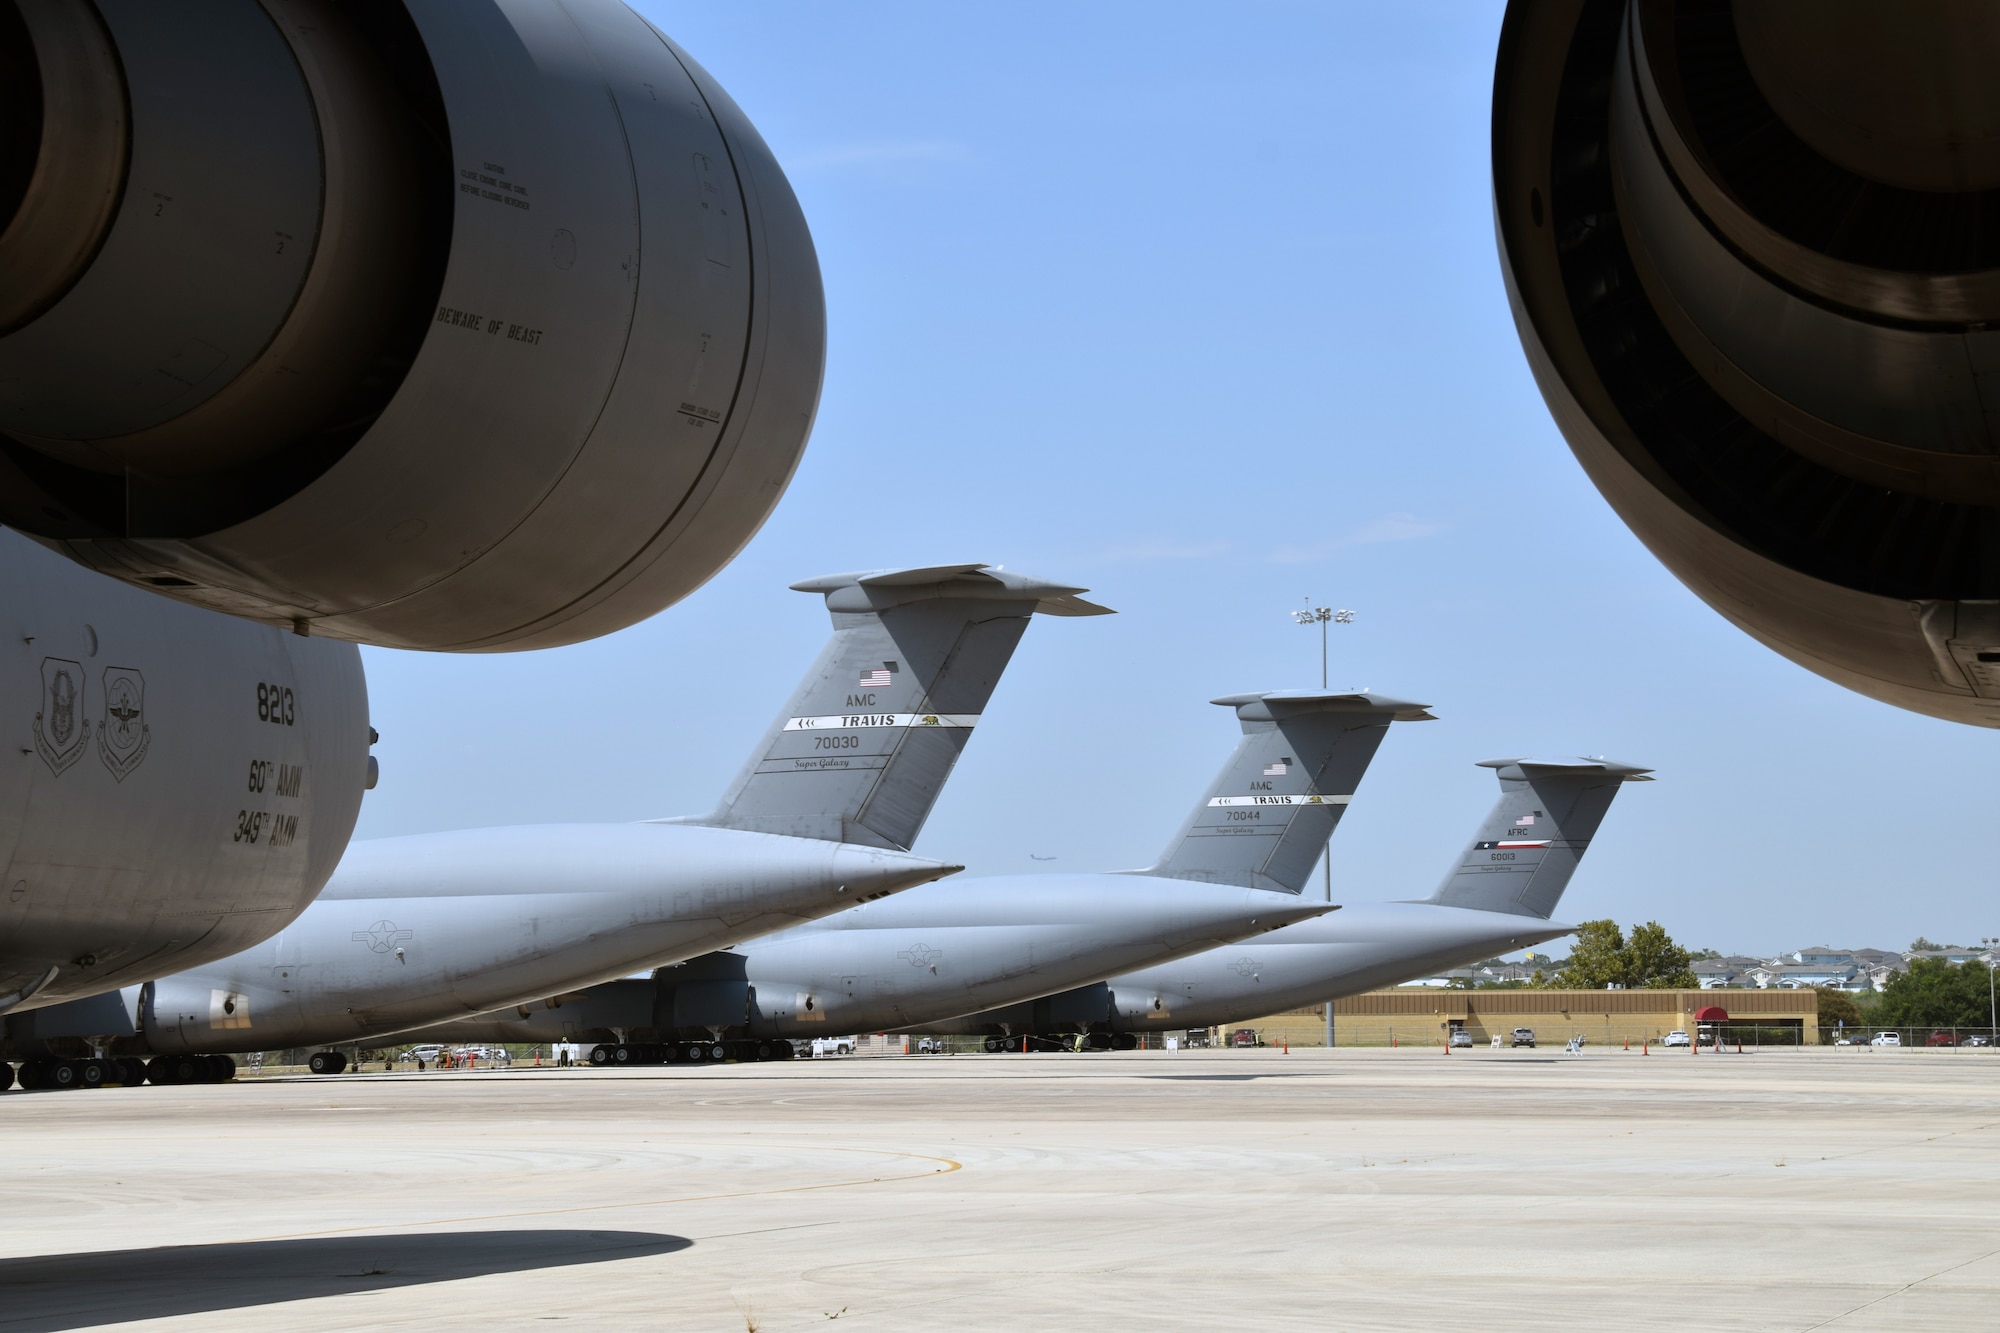 C-5M Super Galaxy cargo aircraft assigned to Travis Air Force Base, California, sit among C-5Ms with the 433rd Airlift Wing on a ramp Aug. 20 at Joint Base San Antonio-Lackland, Texas.